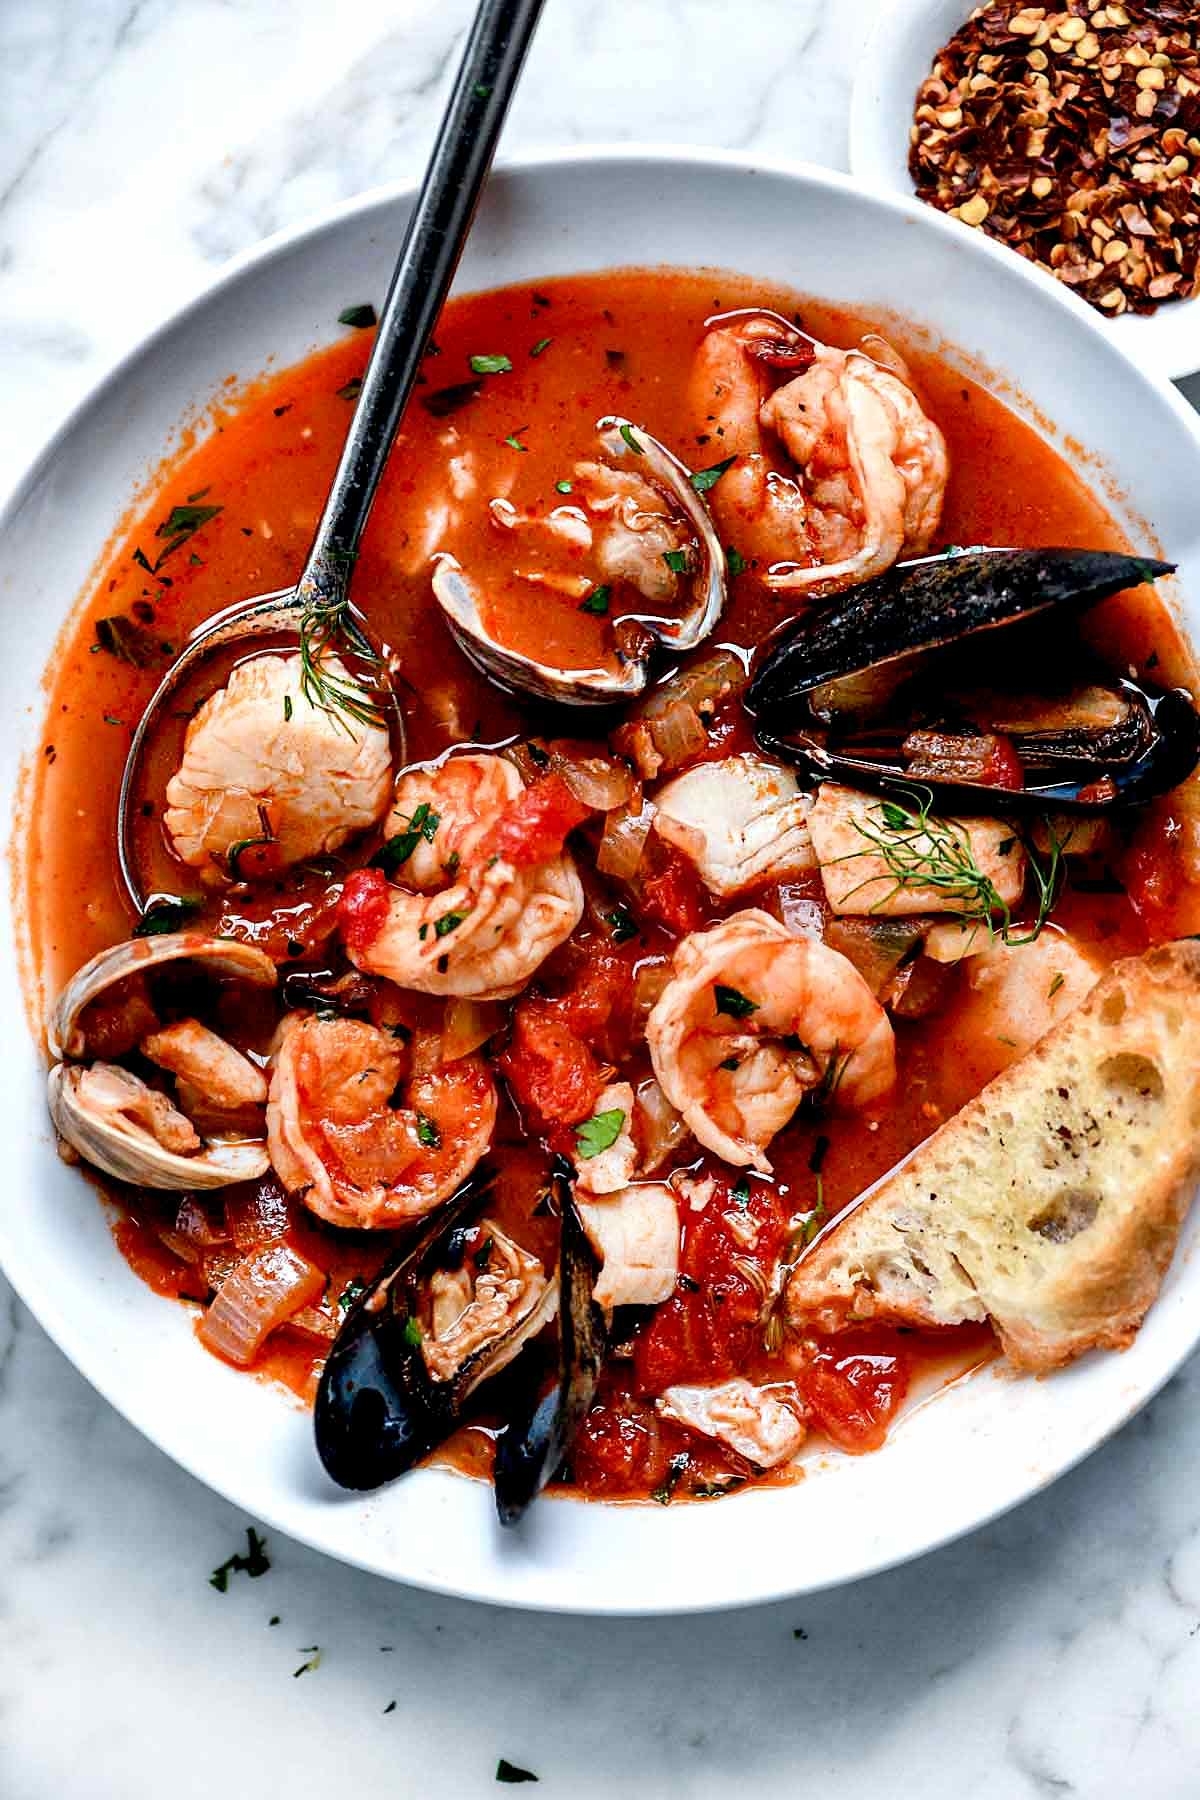 Tomato stew with different seafood